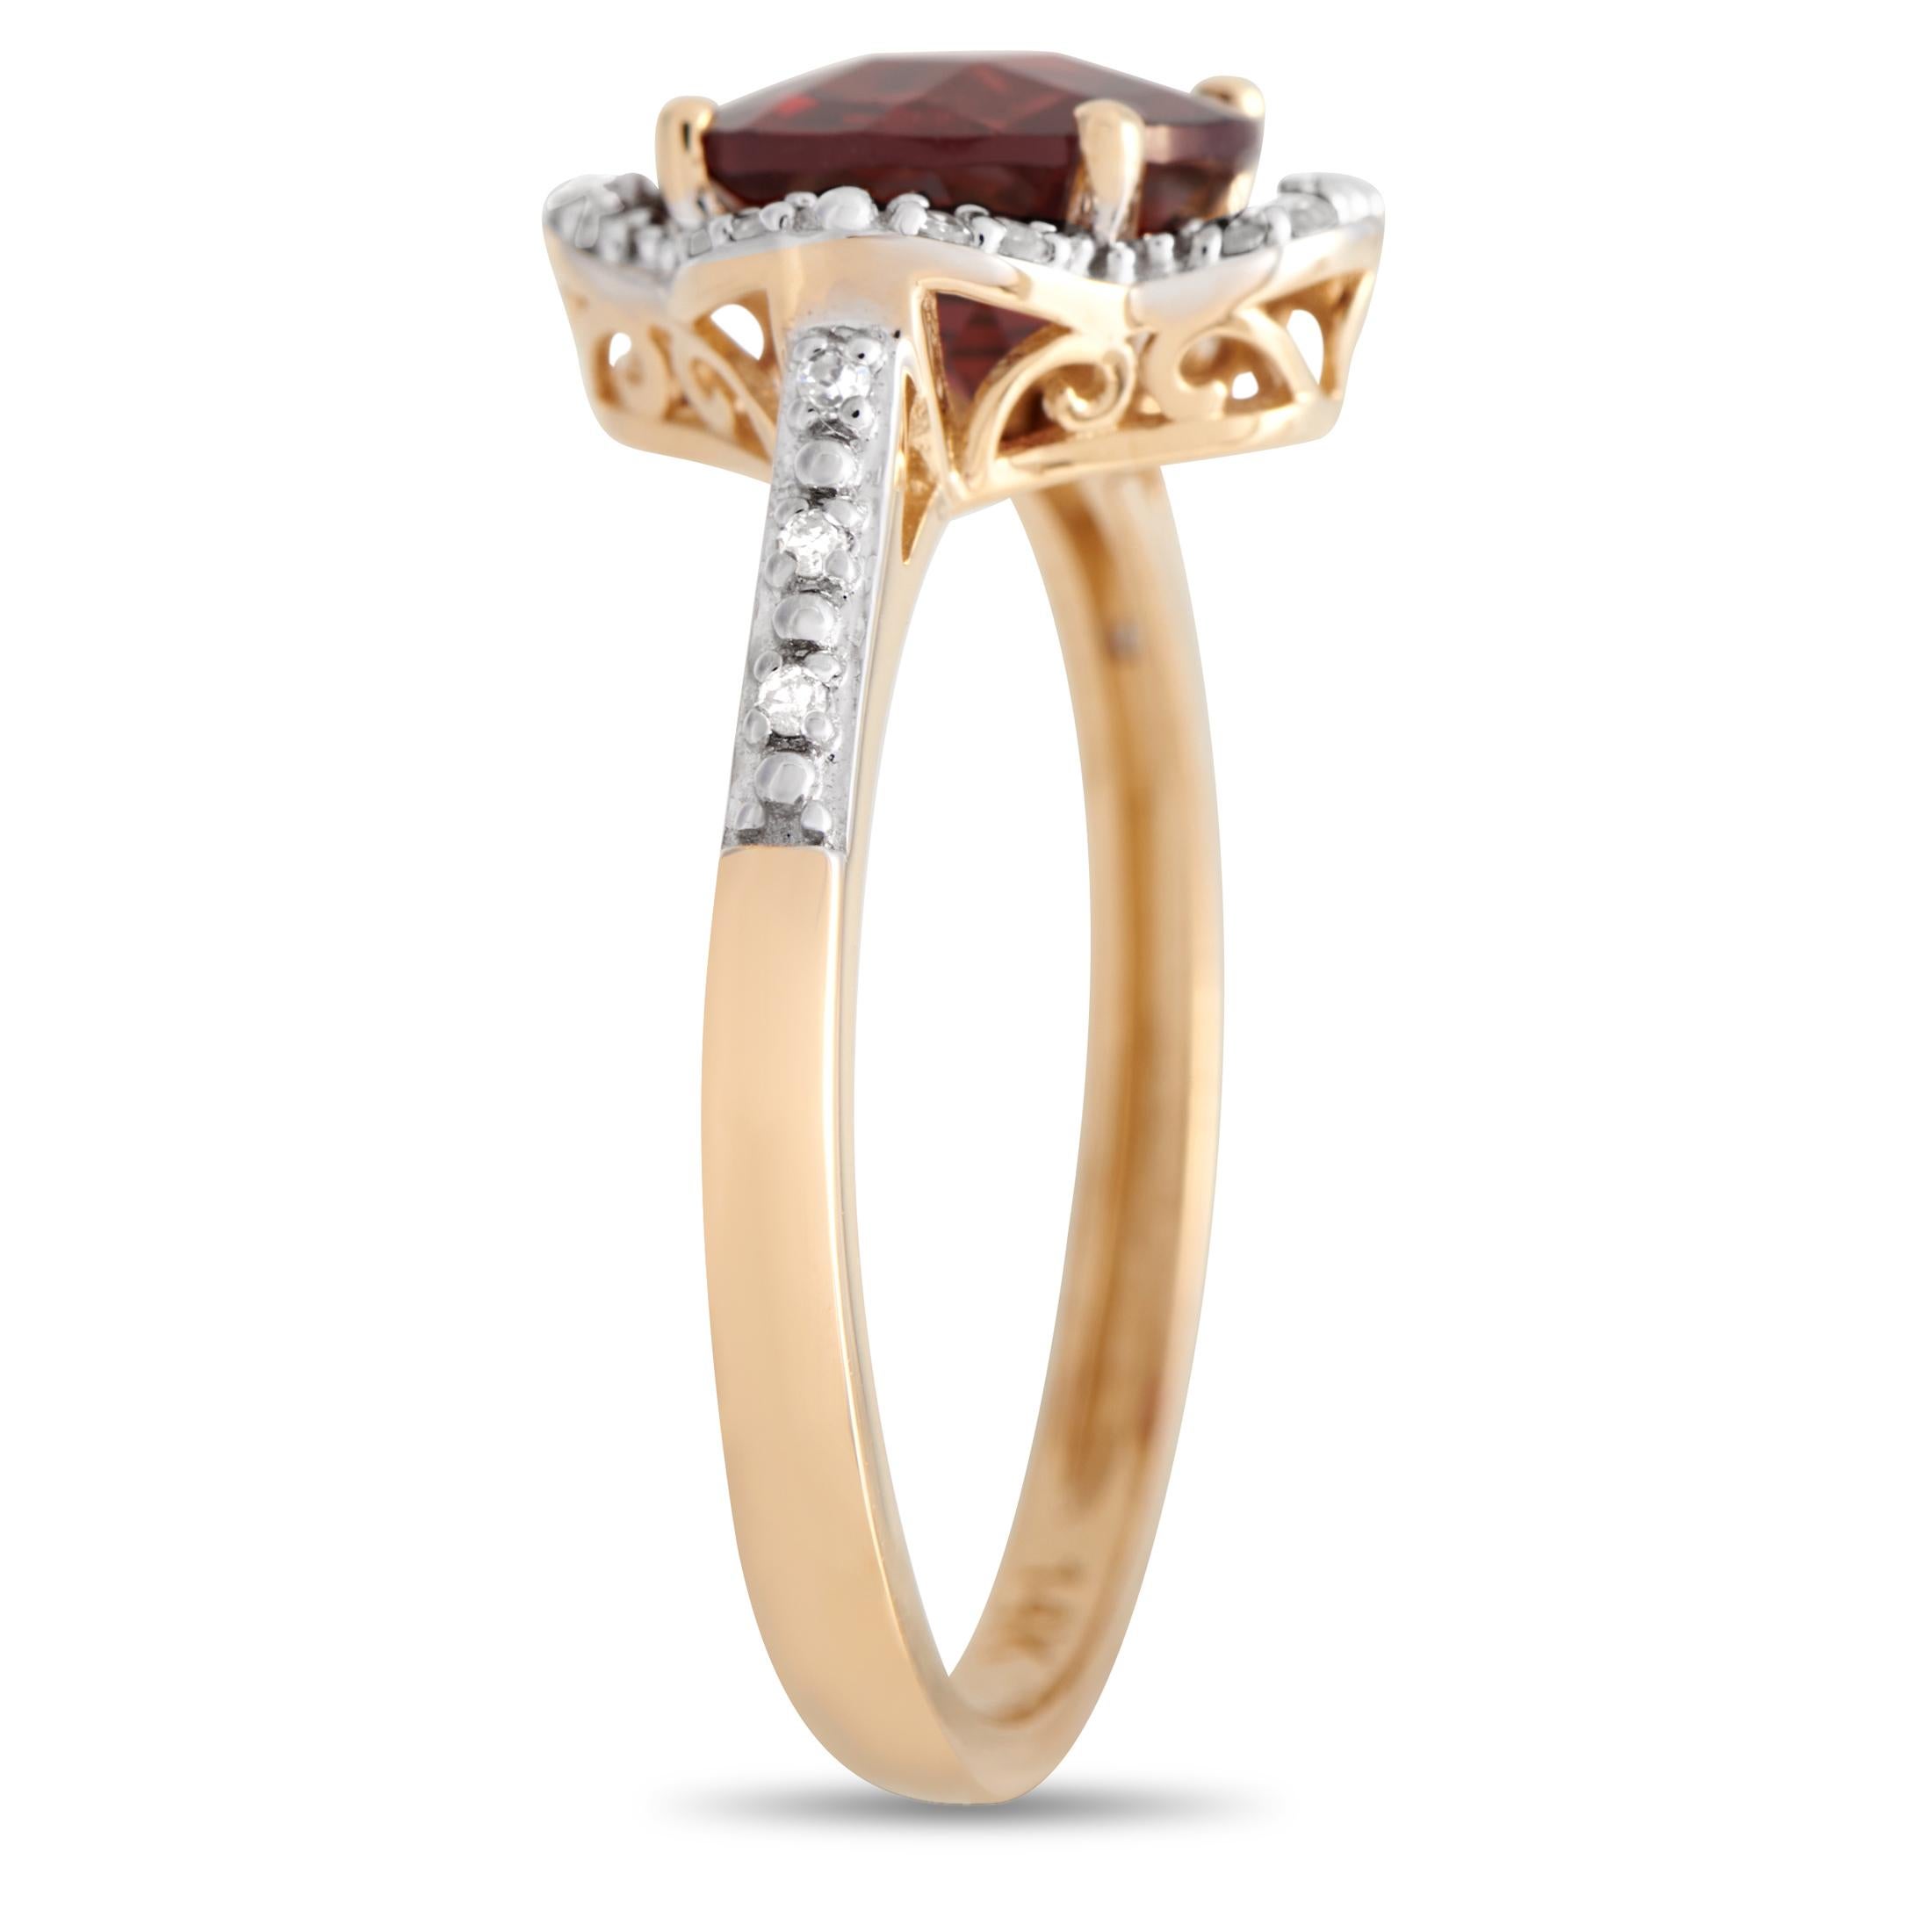 Add some color into your accessorizing style through this gemstone ring. It features a slim band in 14K yellow gold, with subtly arching shoulders lined with diamonds. A round garnet with an alluring deep red hue is mounted on a diamond-traced